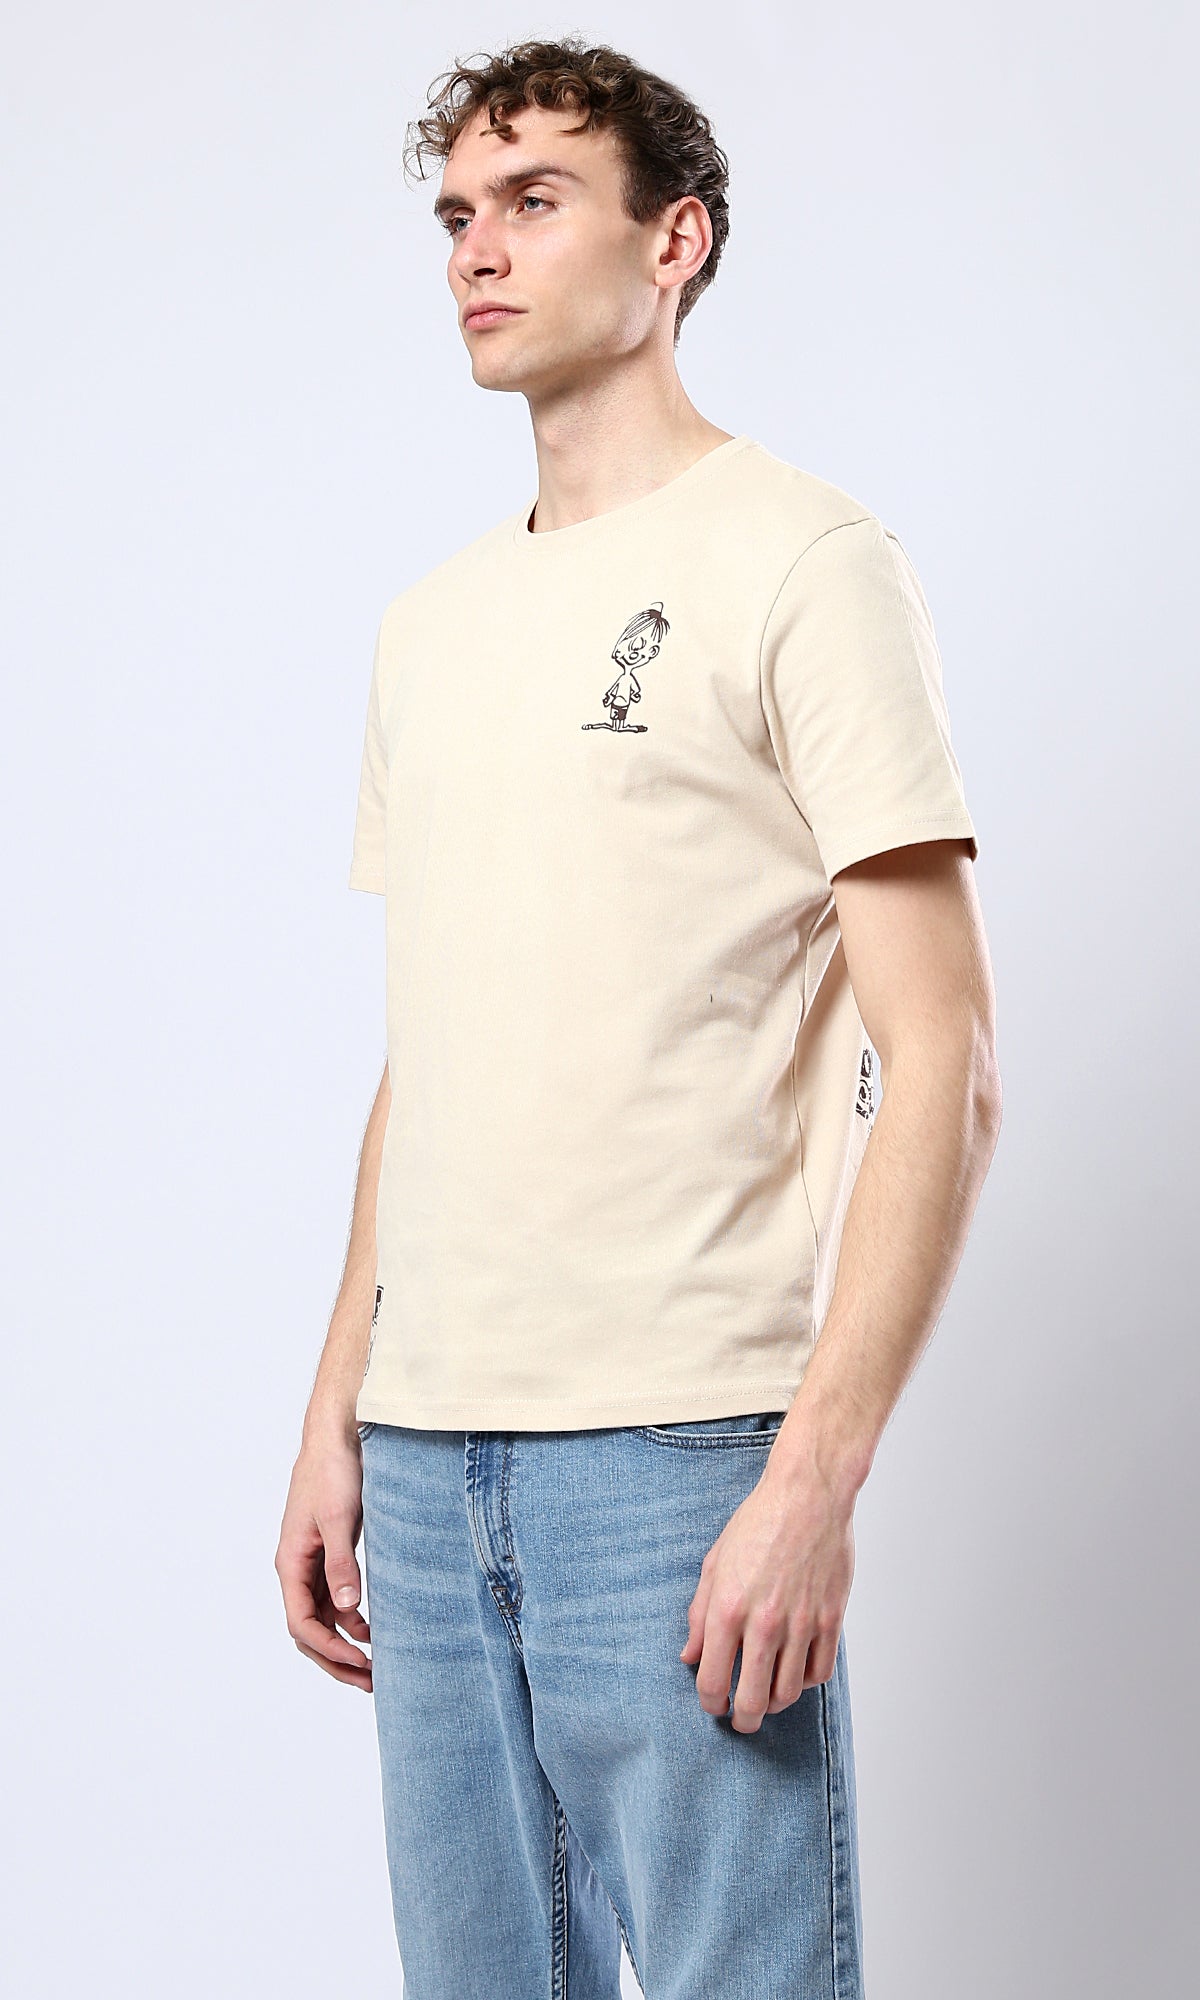 O179351 Slip On Printed Casual Cotton Tee - Beige